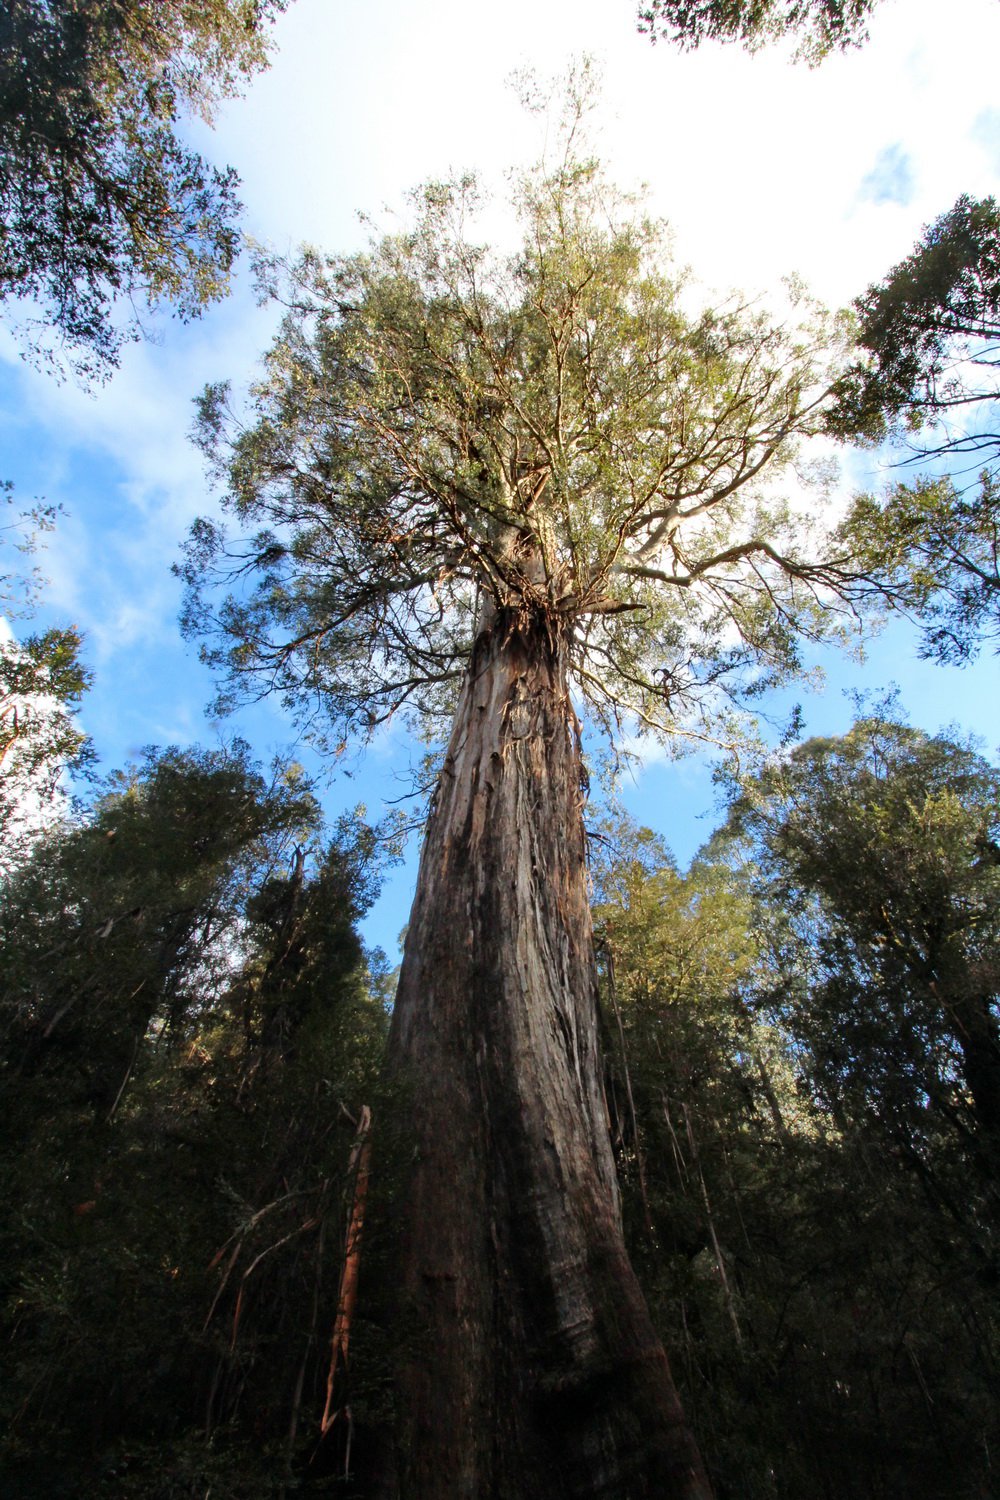 The 75m, 300 year old mountain ash that is The Ada Tree. Ada Tree walk, Noojee. July 2020.